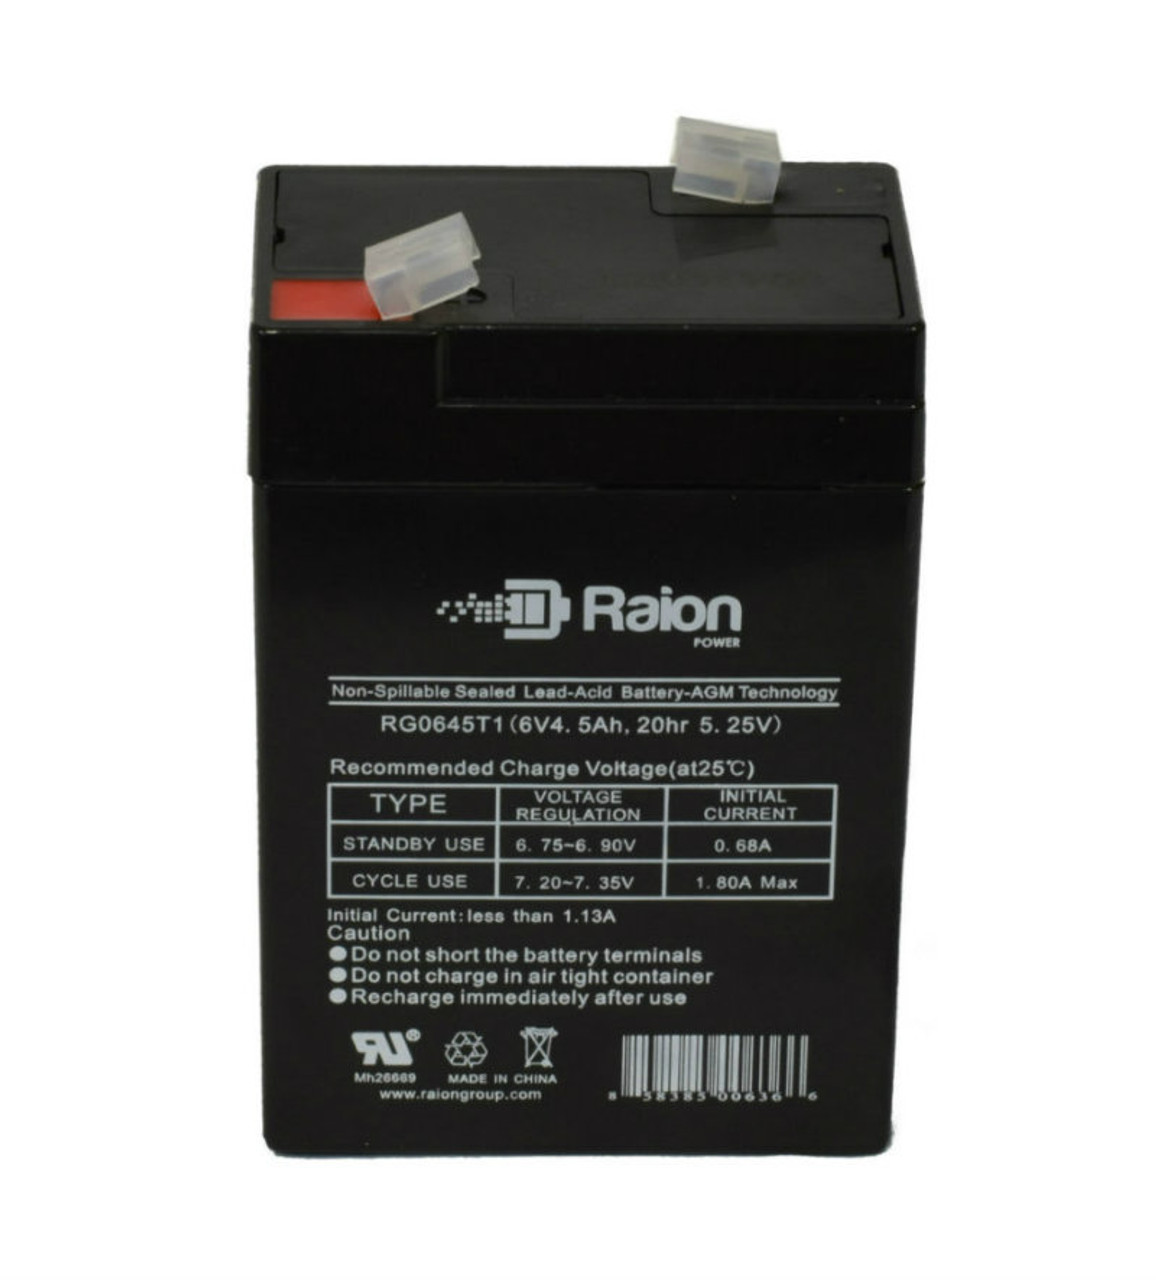 Raion Power RG0645T1 Replacement Battery Cartridge for Light Alarms E8W